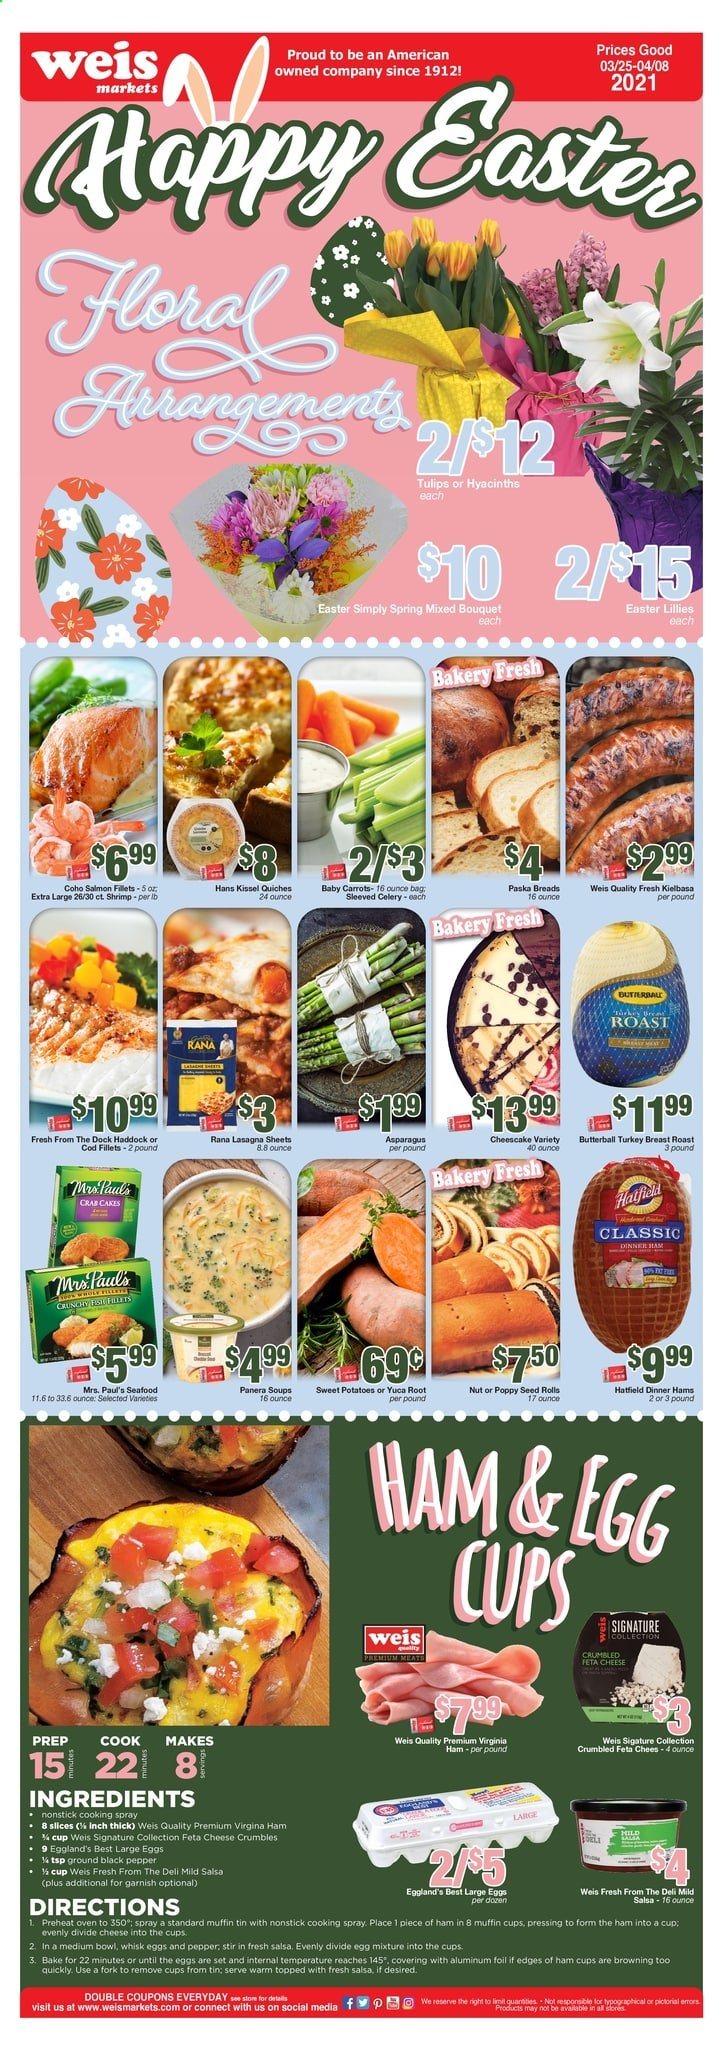 thumbnail - Weis Flyer - 03/25/2021 - 04/08/2021 - Sales products - sweet potato, muffin, sleeved celery, Butterball, turkey breast, cod, haddock, seafood, shrimps, crab cake, lasagna meal, Giovanni Rana, ham, virginia ham, cheese, feta, large eggs, salsa, lasagne sheets, Rana, cooking spray, L'Or, fork, bowl, aluminium foil, plant seeds, tulip, bouquet, potatoes. Page 3.